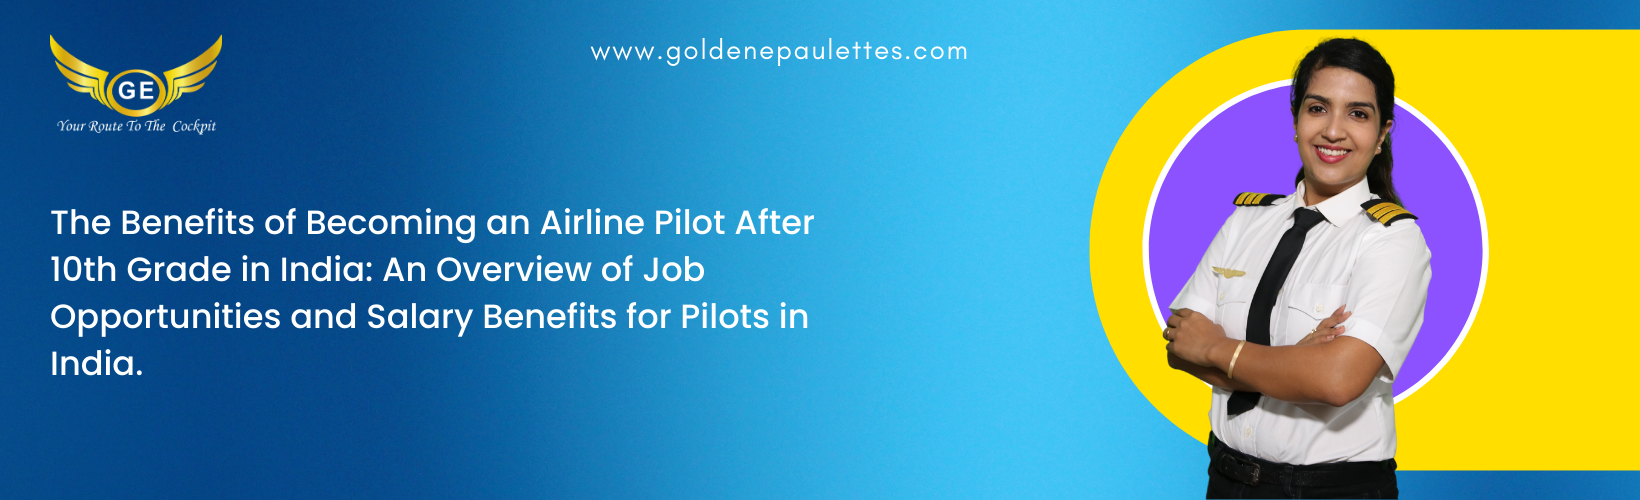 The Advantages of Pursuing a Career as a Pilot After 10th Grade in India